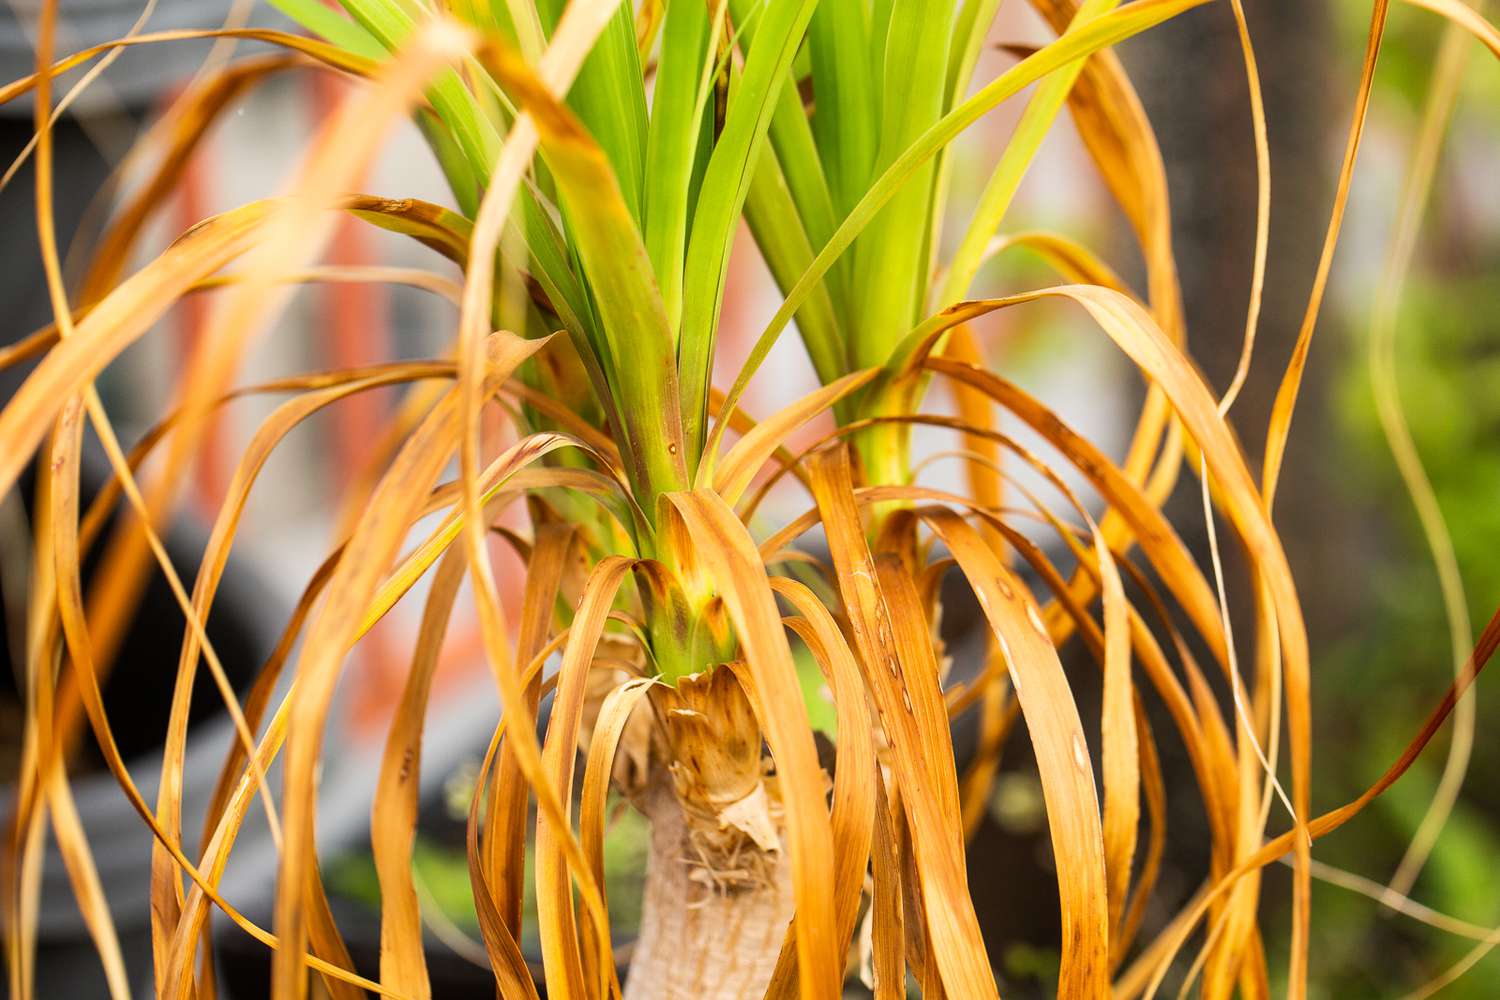 How To Fix Yellowing Spider Plant